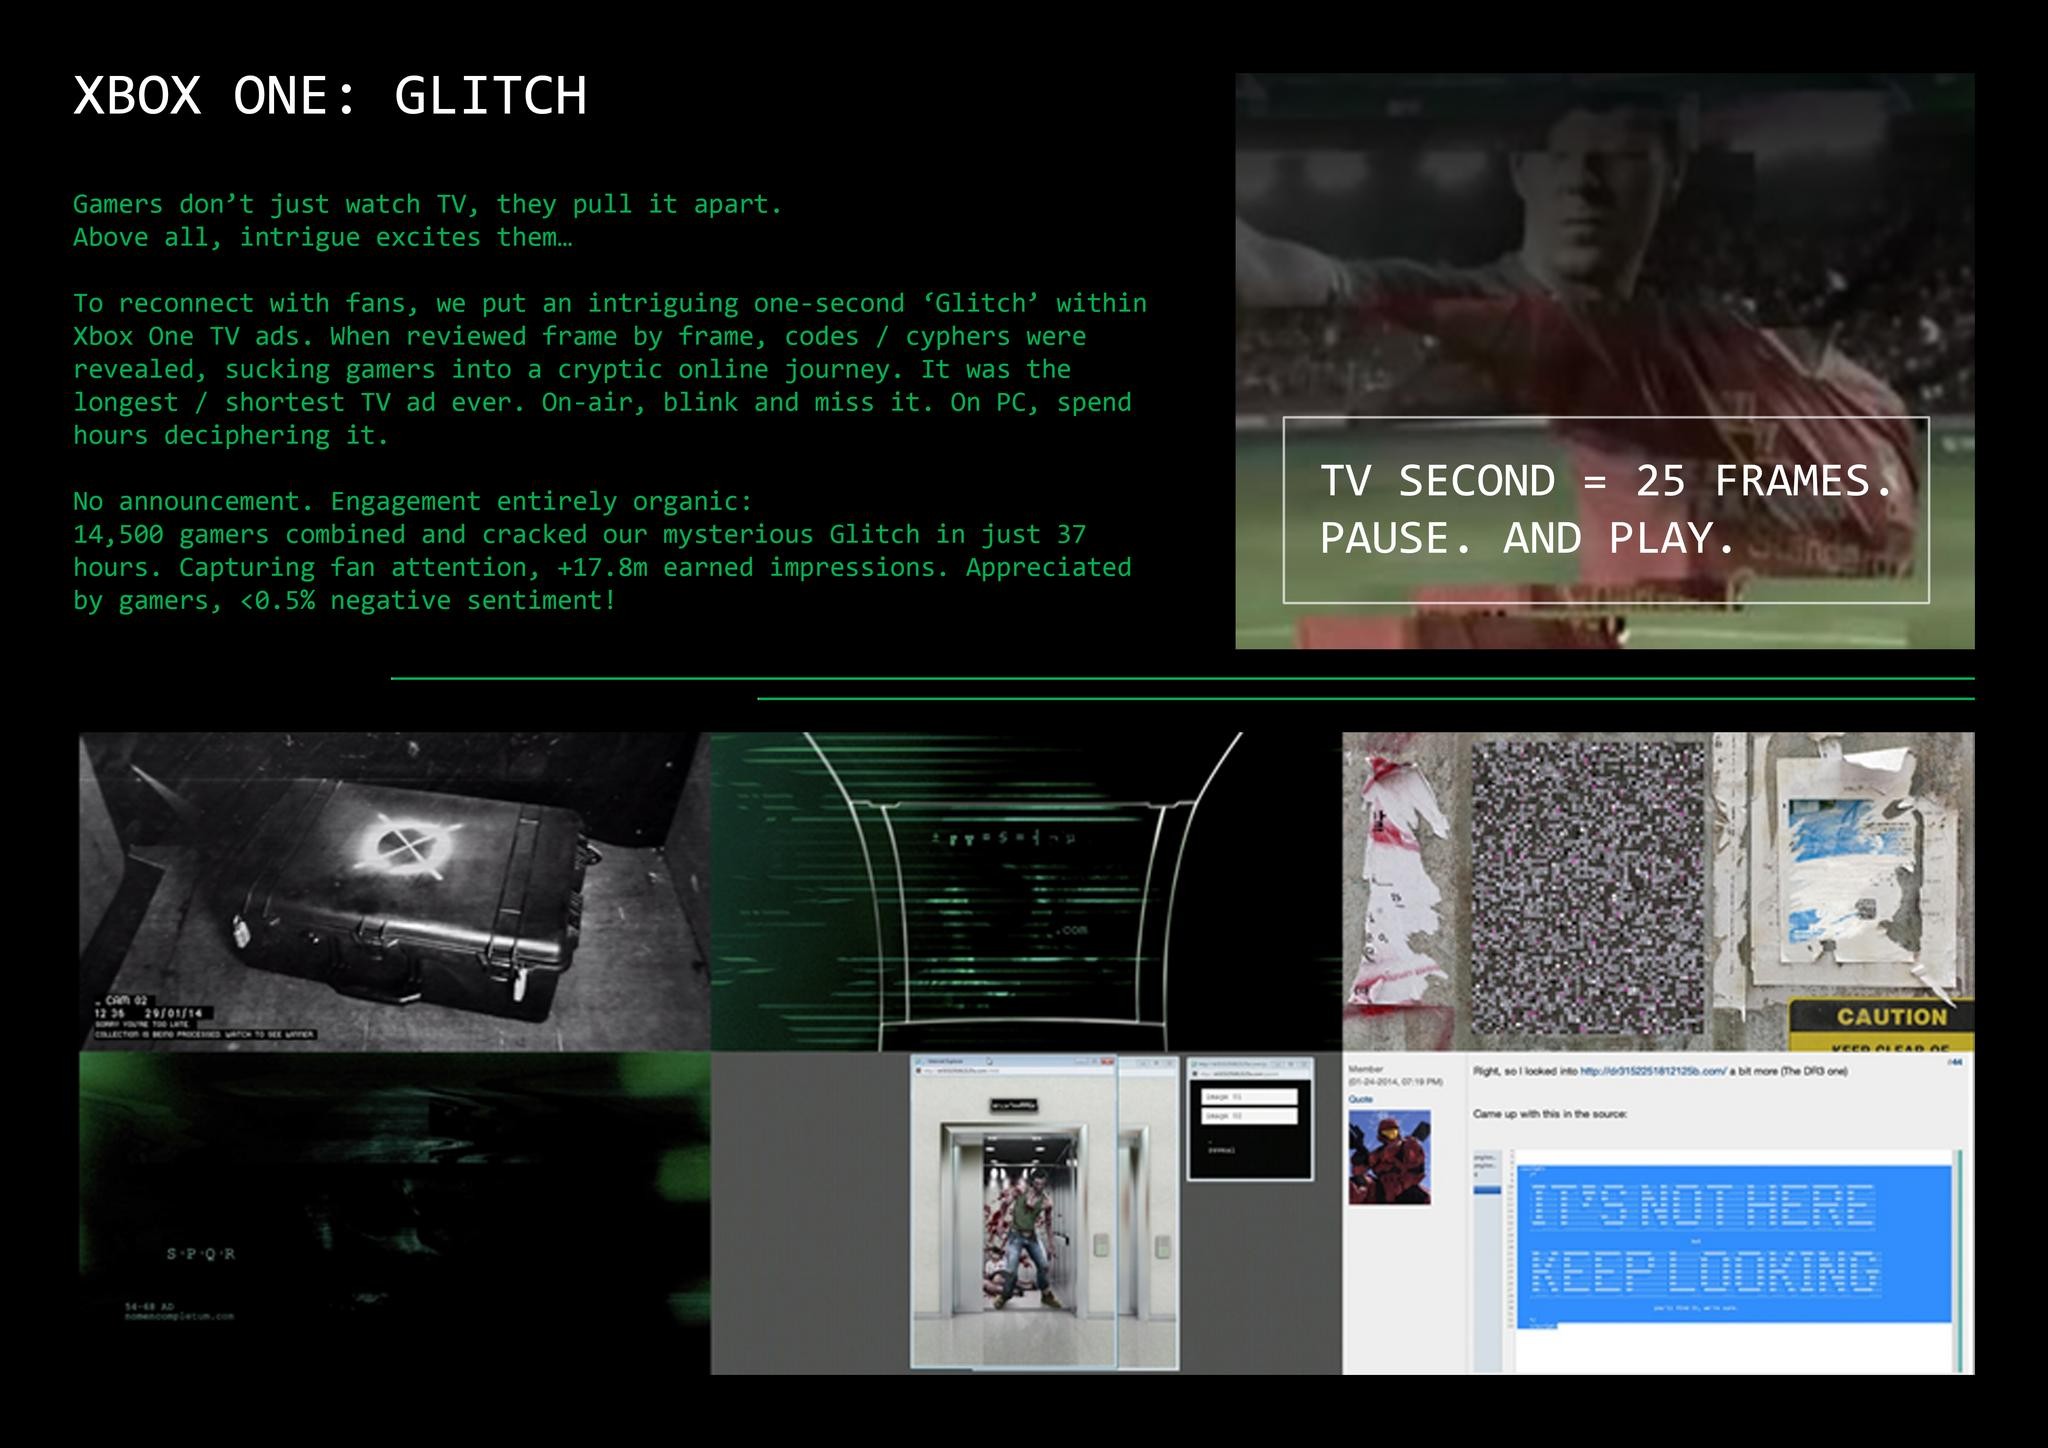 GLITCH - THE LONGEST / SHORTEST TV AD EVER!